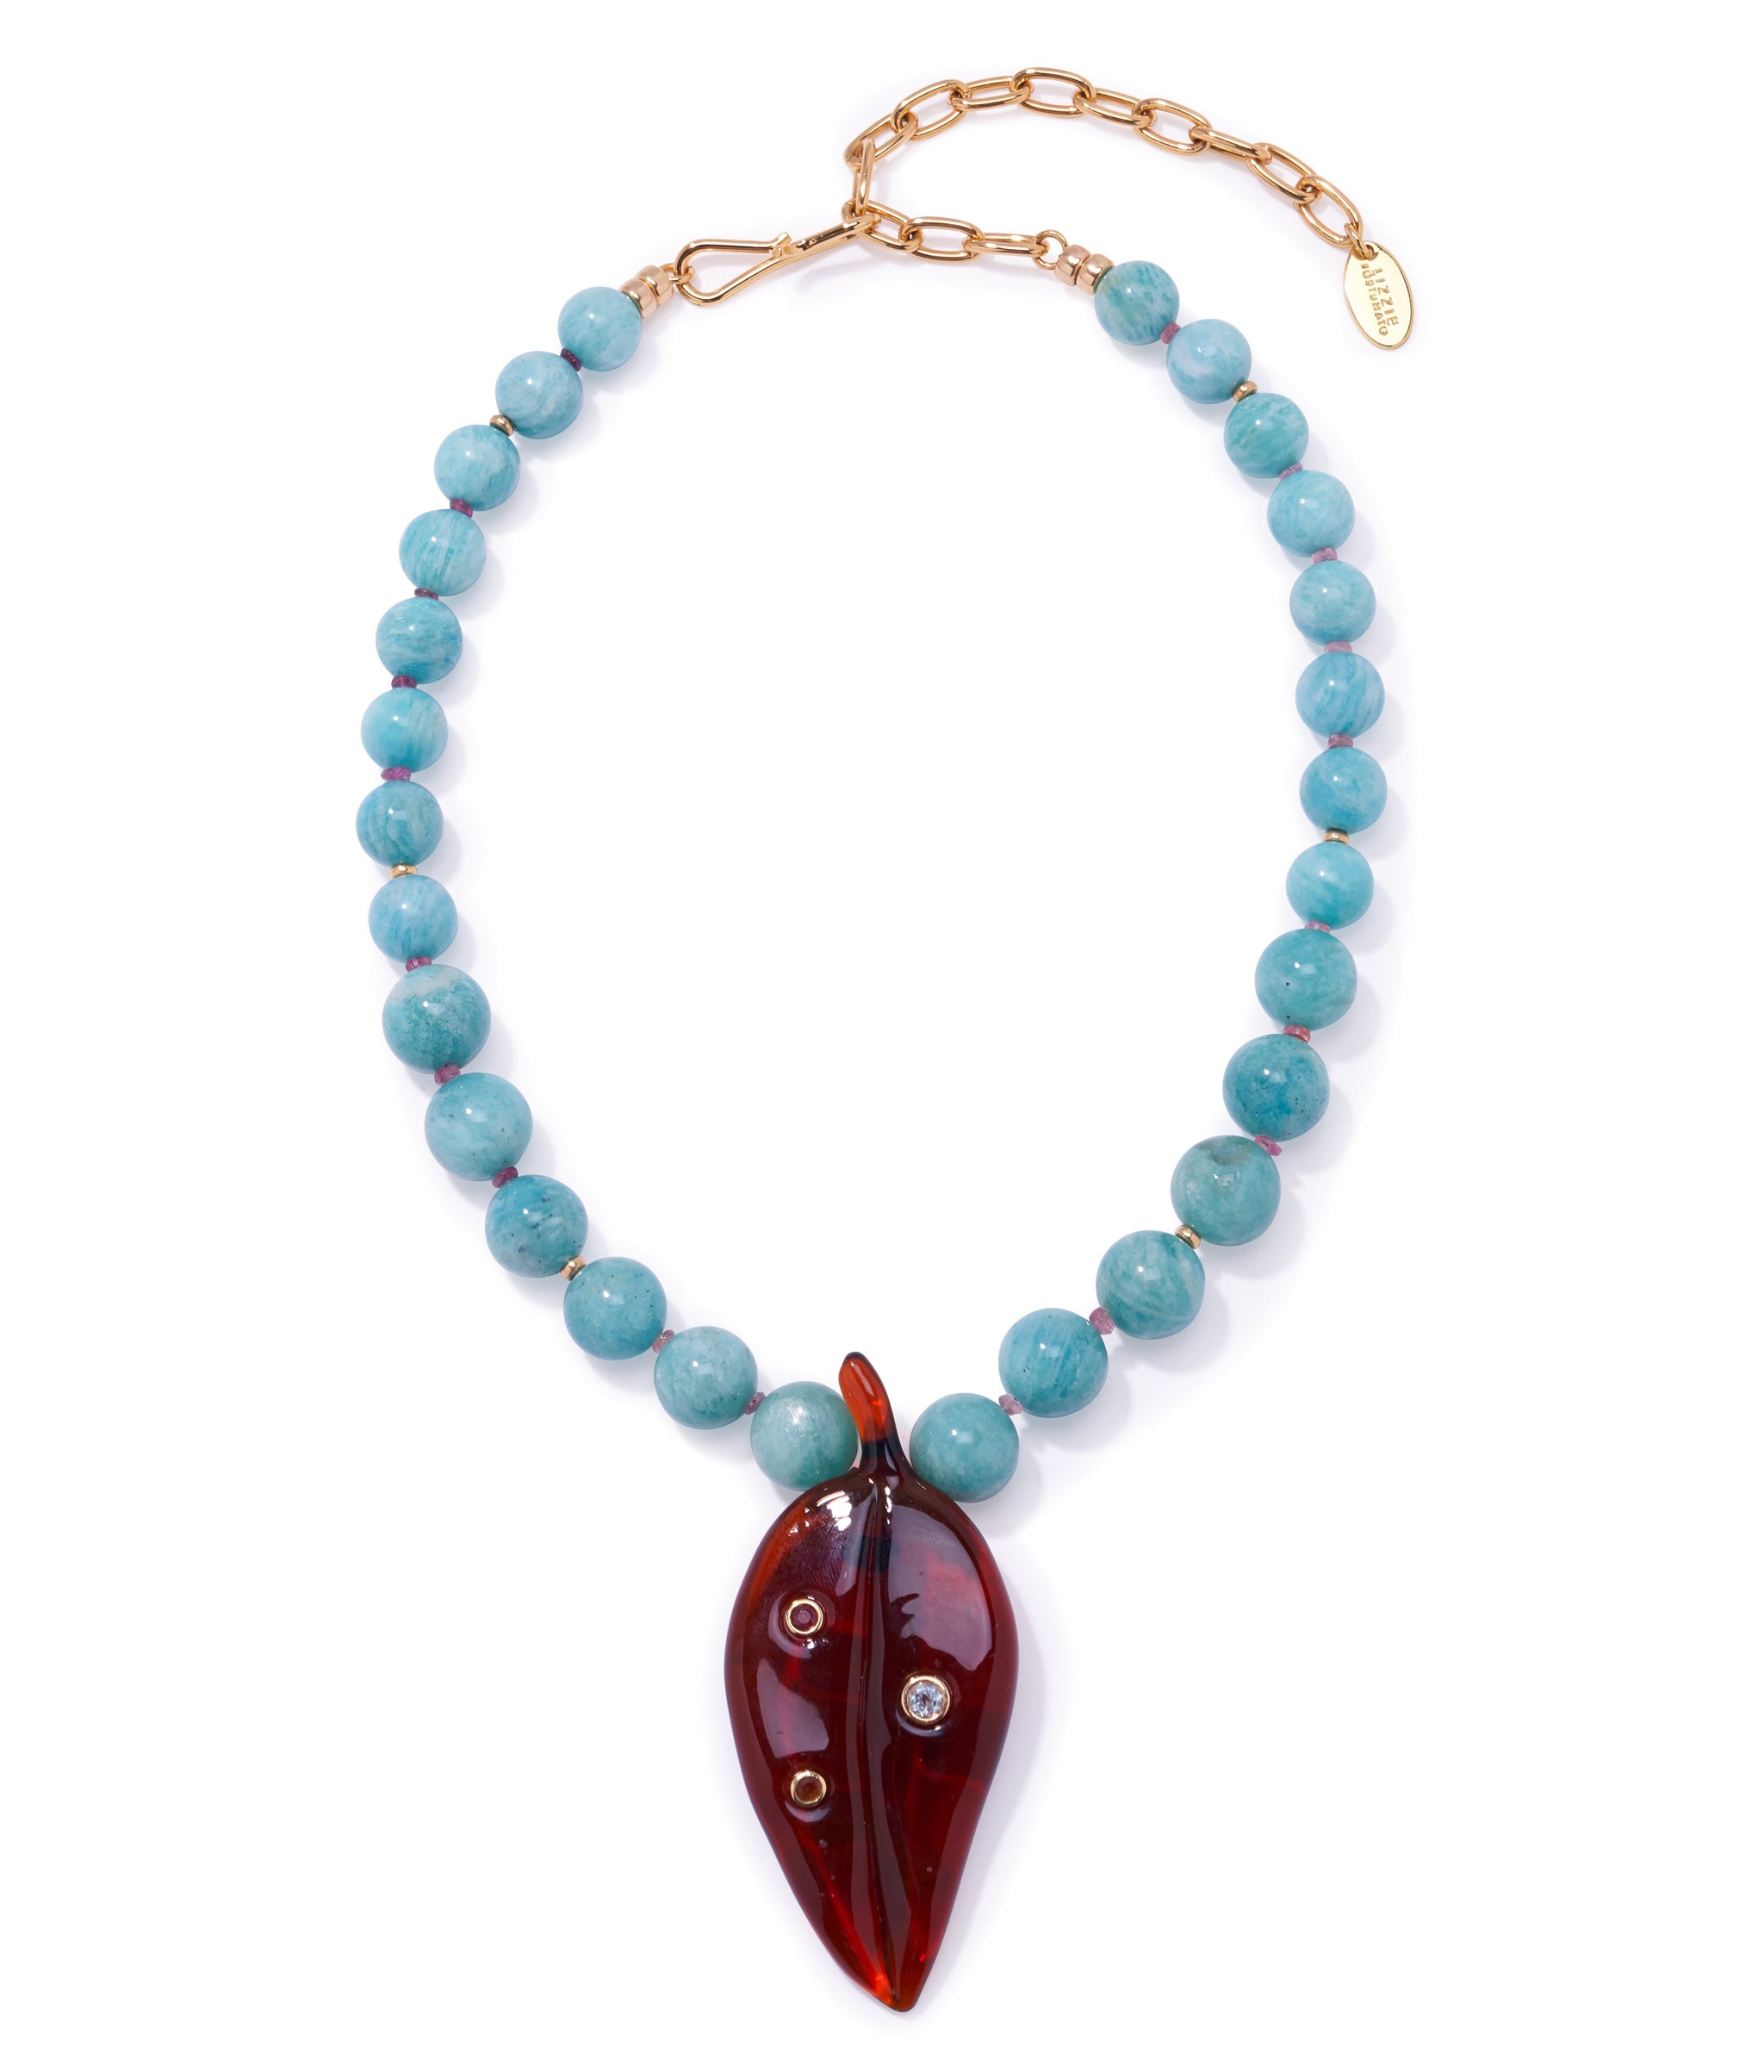 Vinca Leaf Necklace. Amazonite round beads with tourmaline accents and brown glass leaf pendant inset with stones